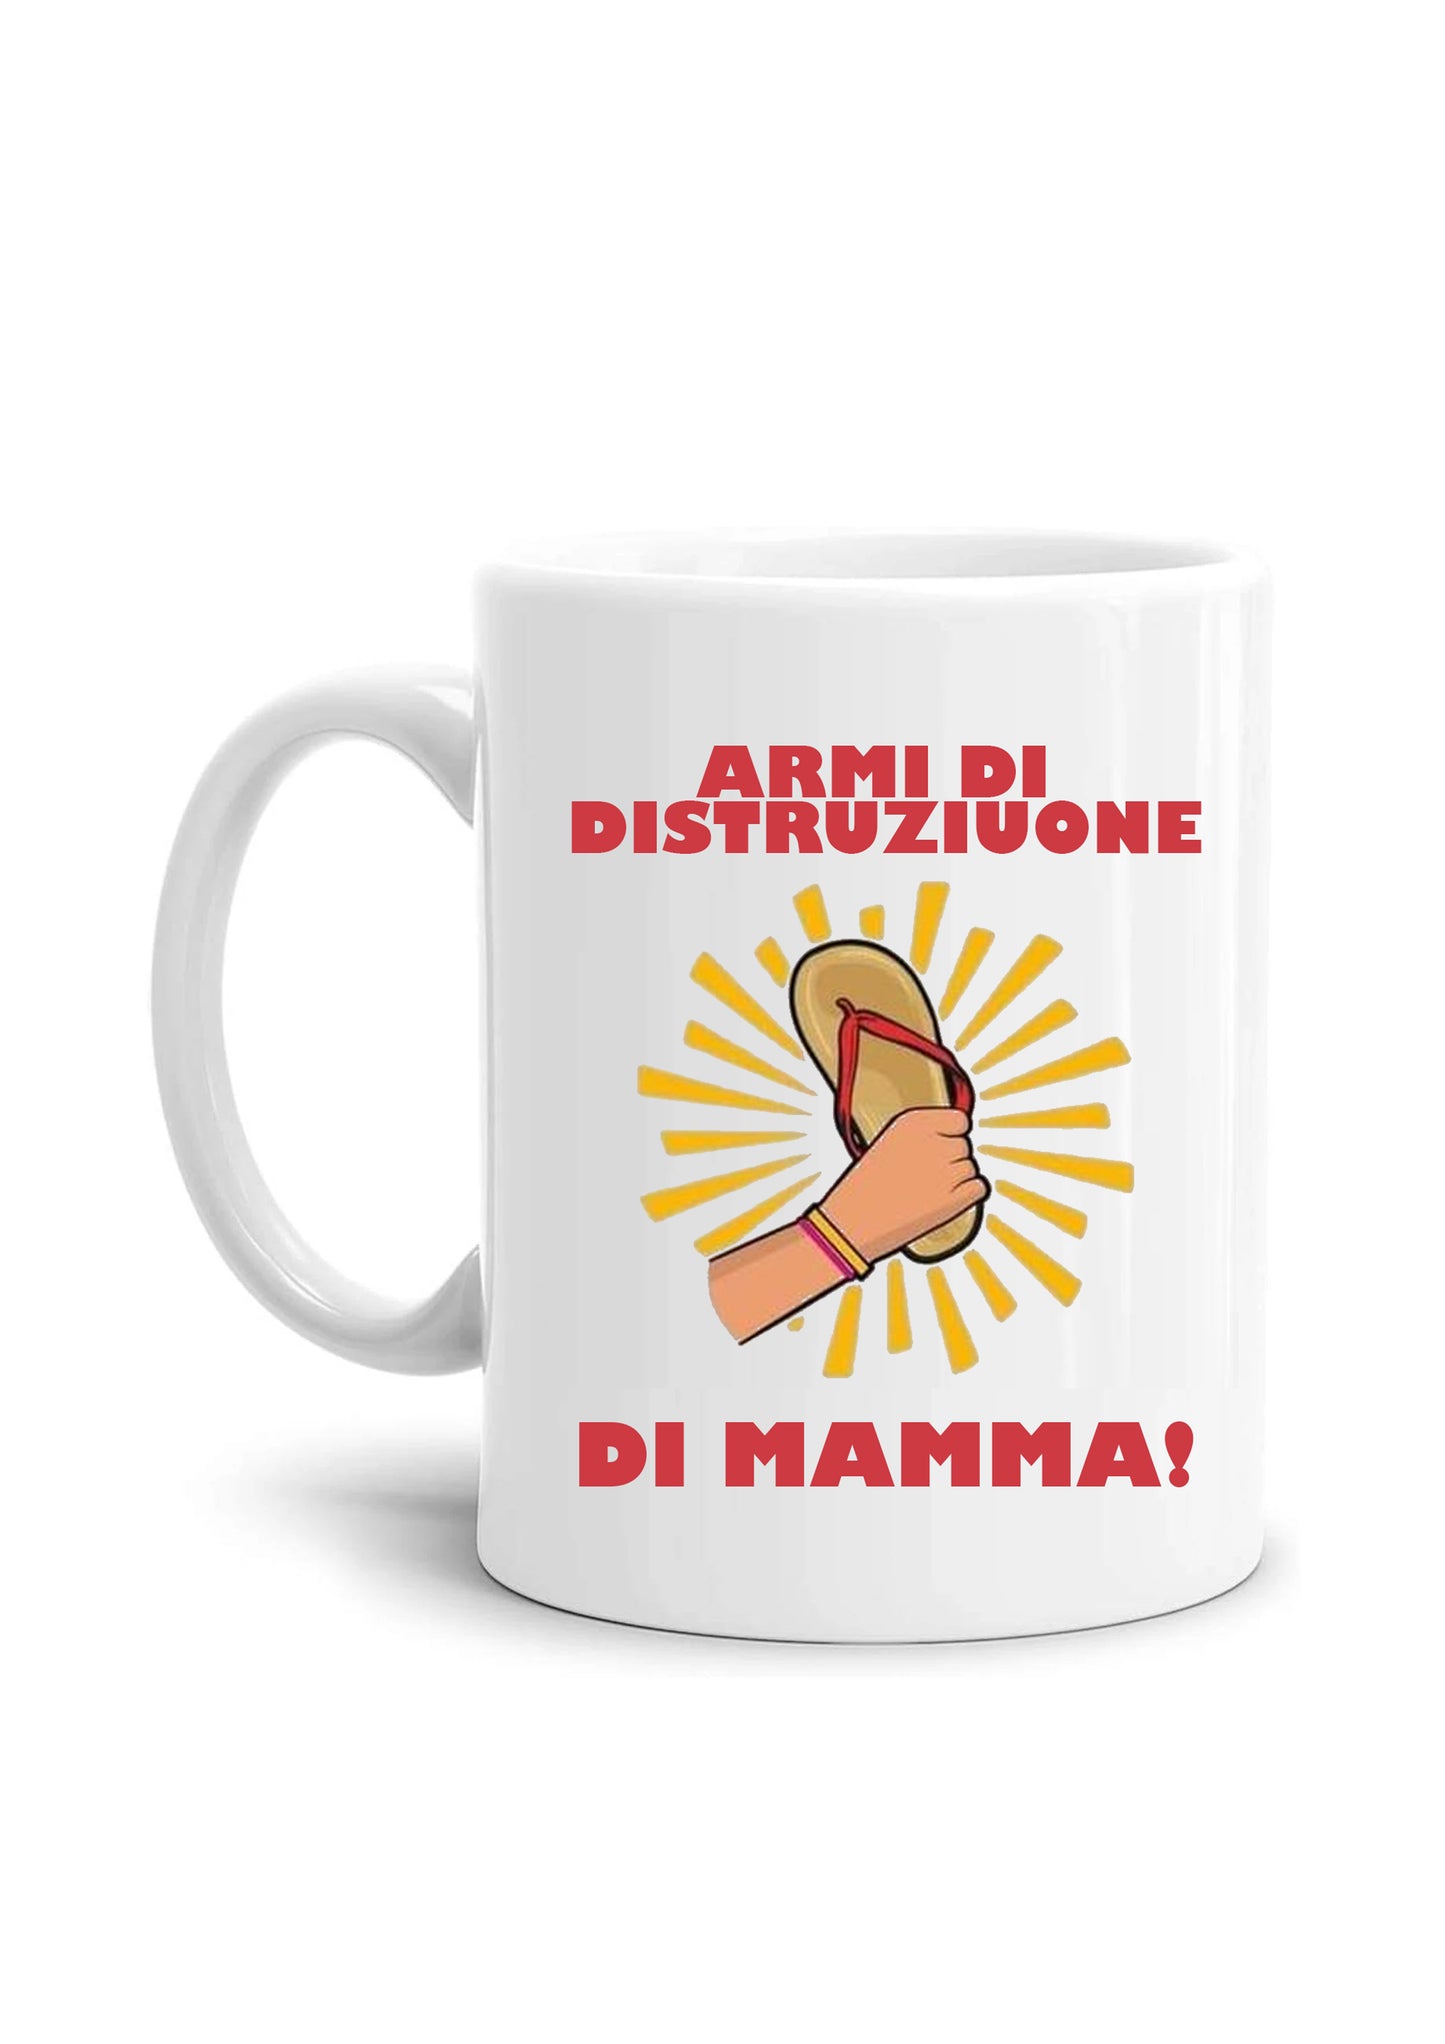 Mug-morning mood head in the funny cup nice gift for mum dad colleagues friends ceramic for breakfast coffee or tea